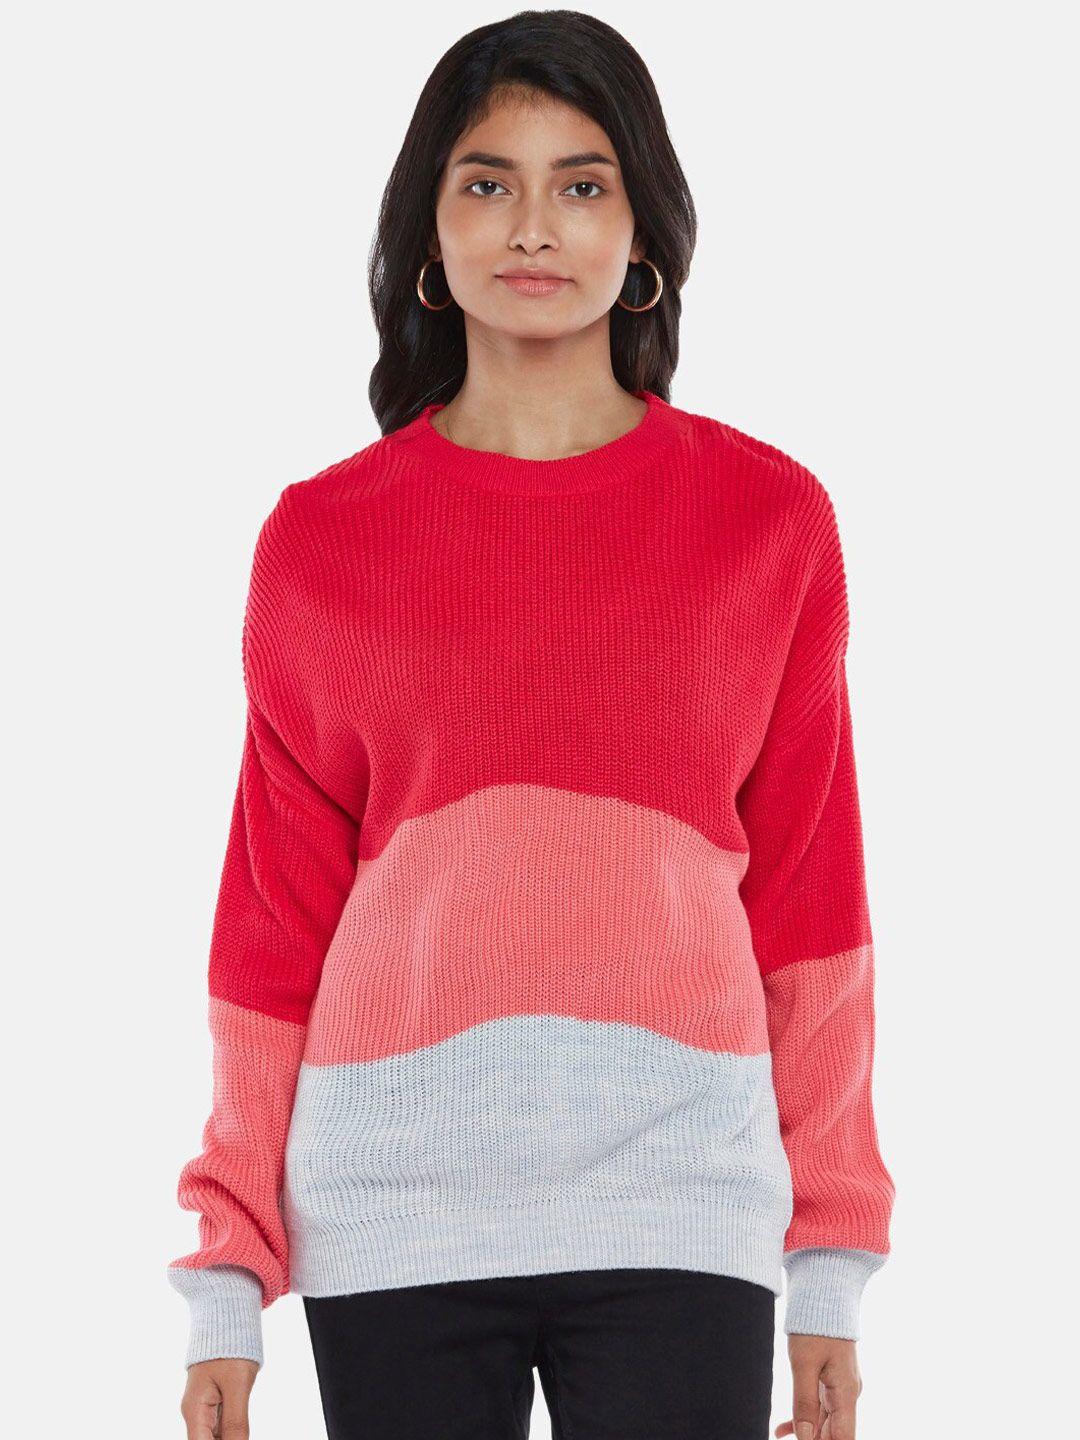 honey by pantaloons women pink & white colourblocked pullover sweater